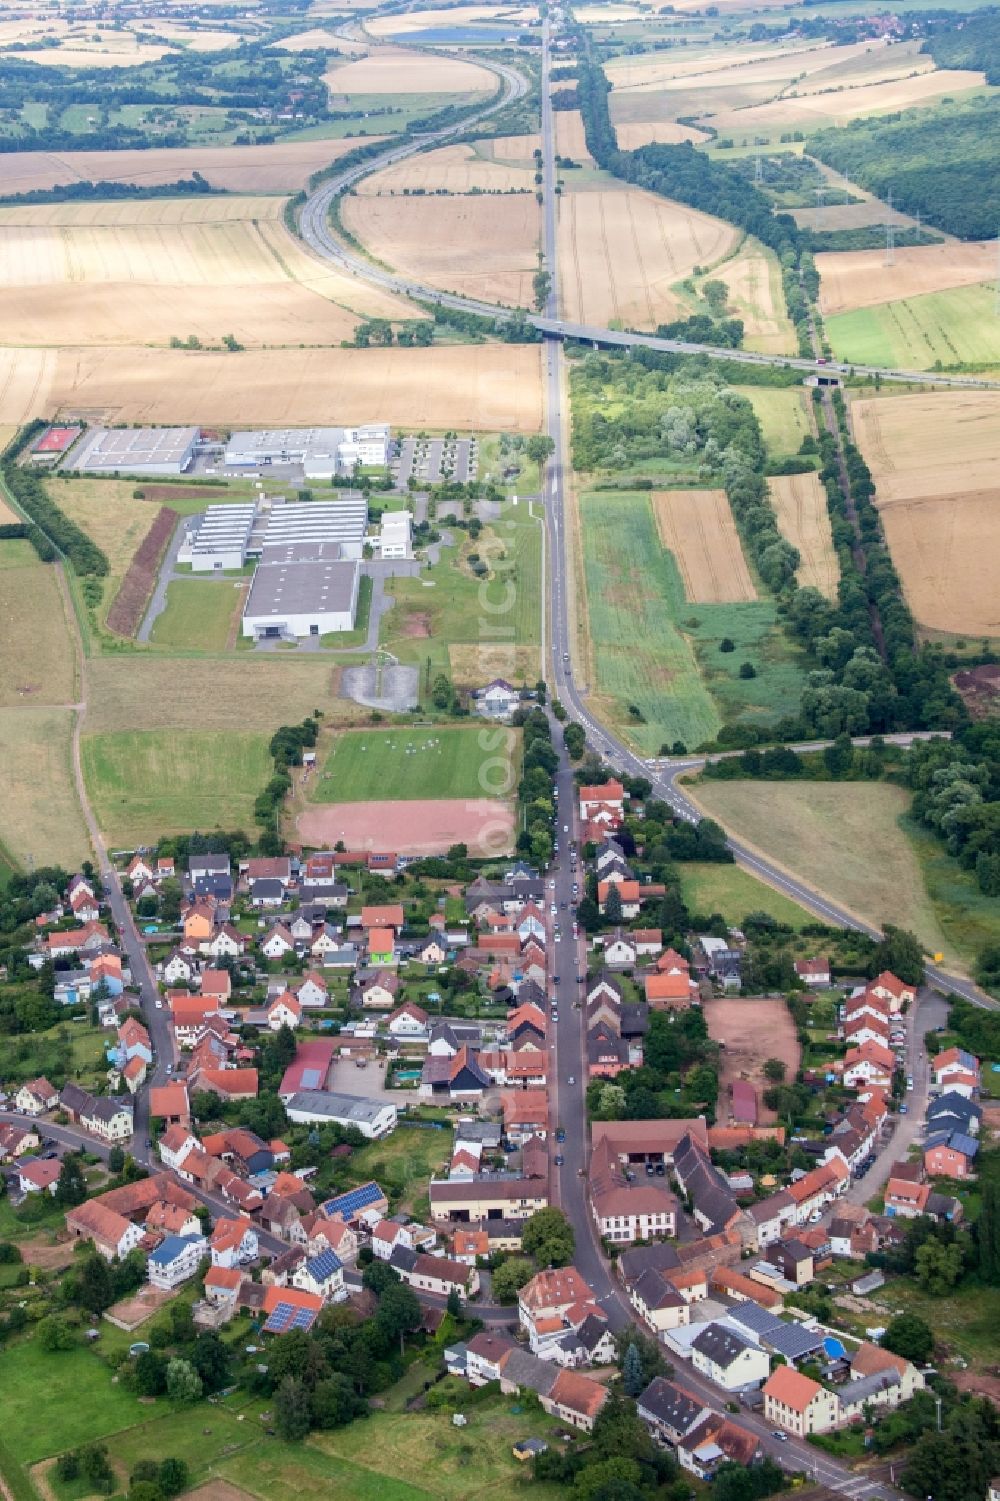 Aerial photograph Winnweiler - Village - view on the edge of agricultural fields and farmland in the district Alsenbrueck-Langmeil in Winnweiler in the state Rhineland-Palatinate, Germany